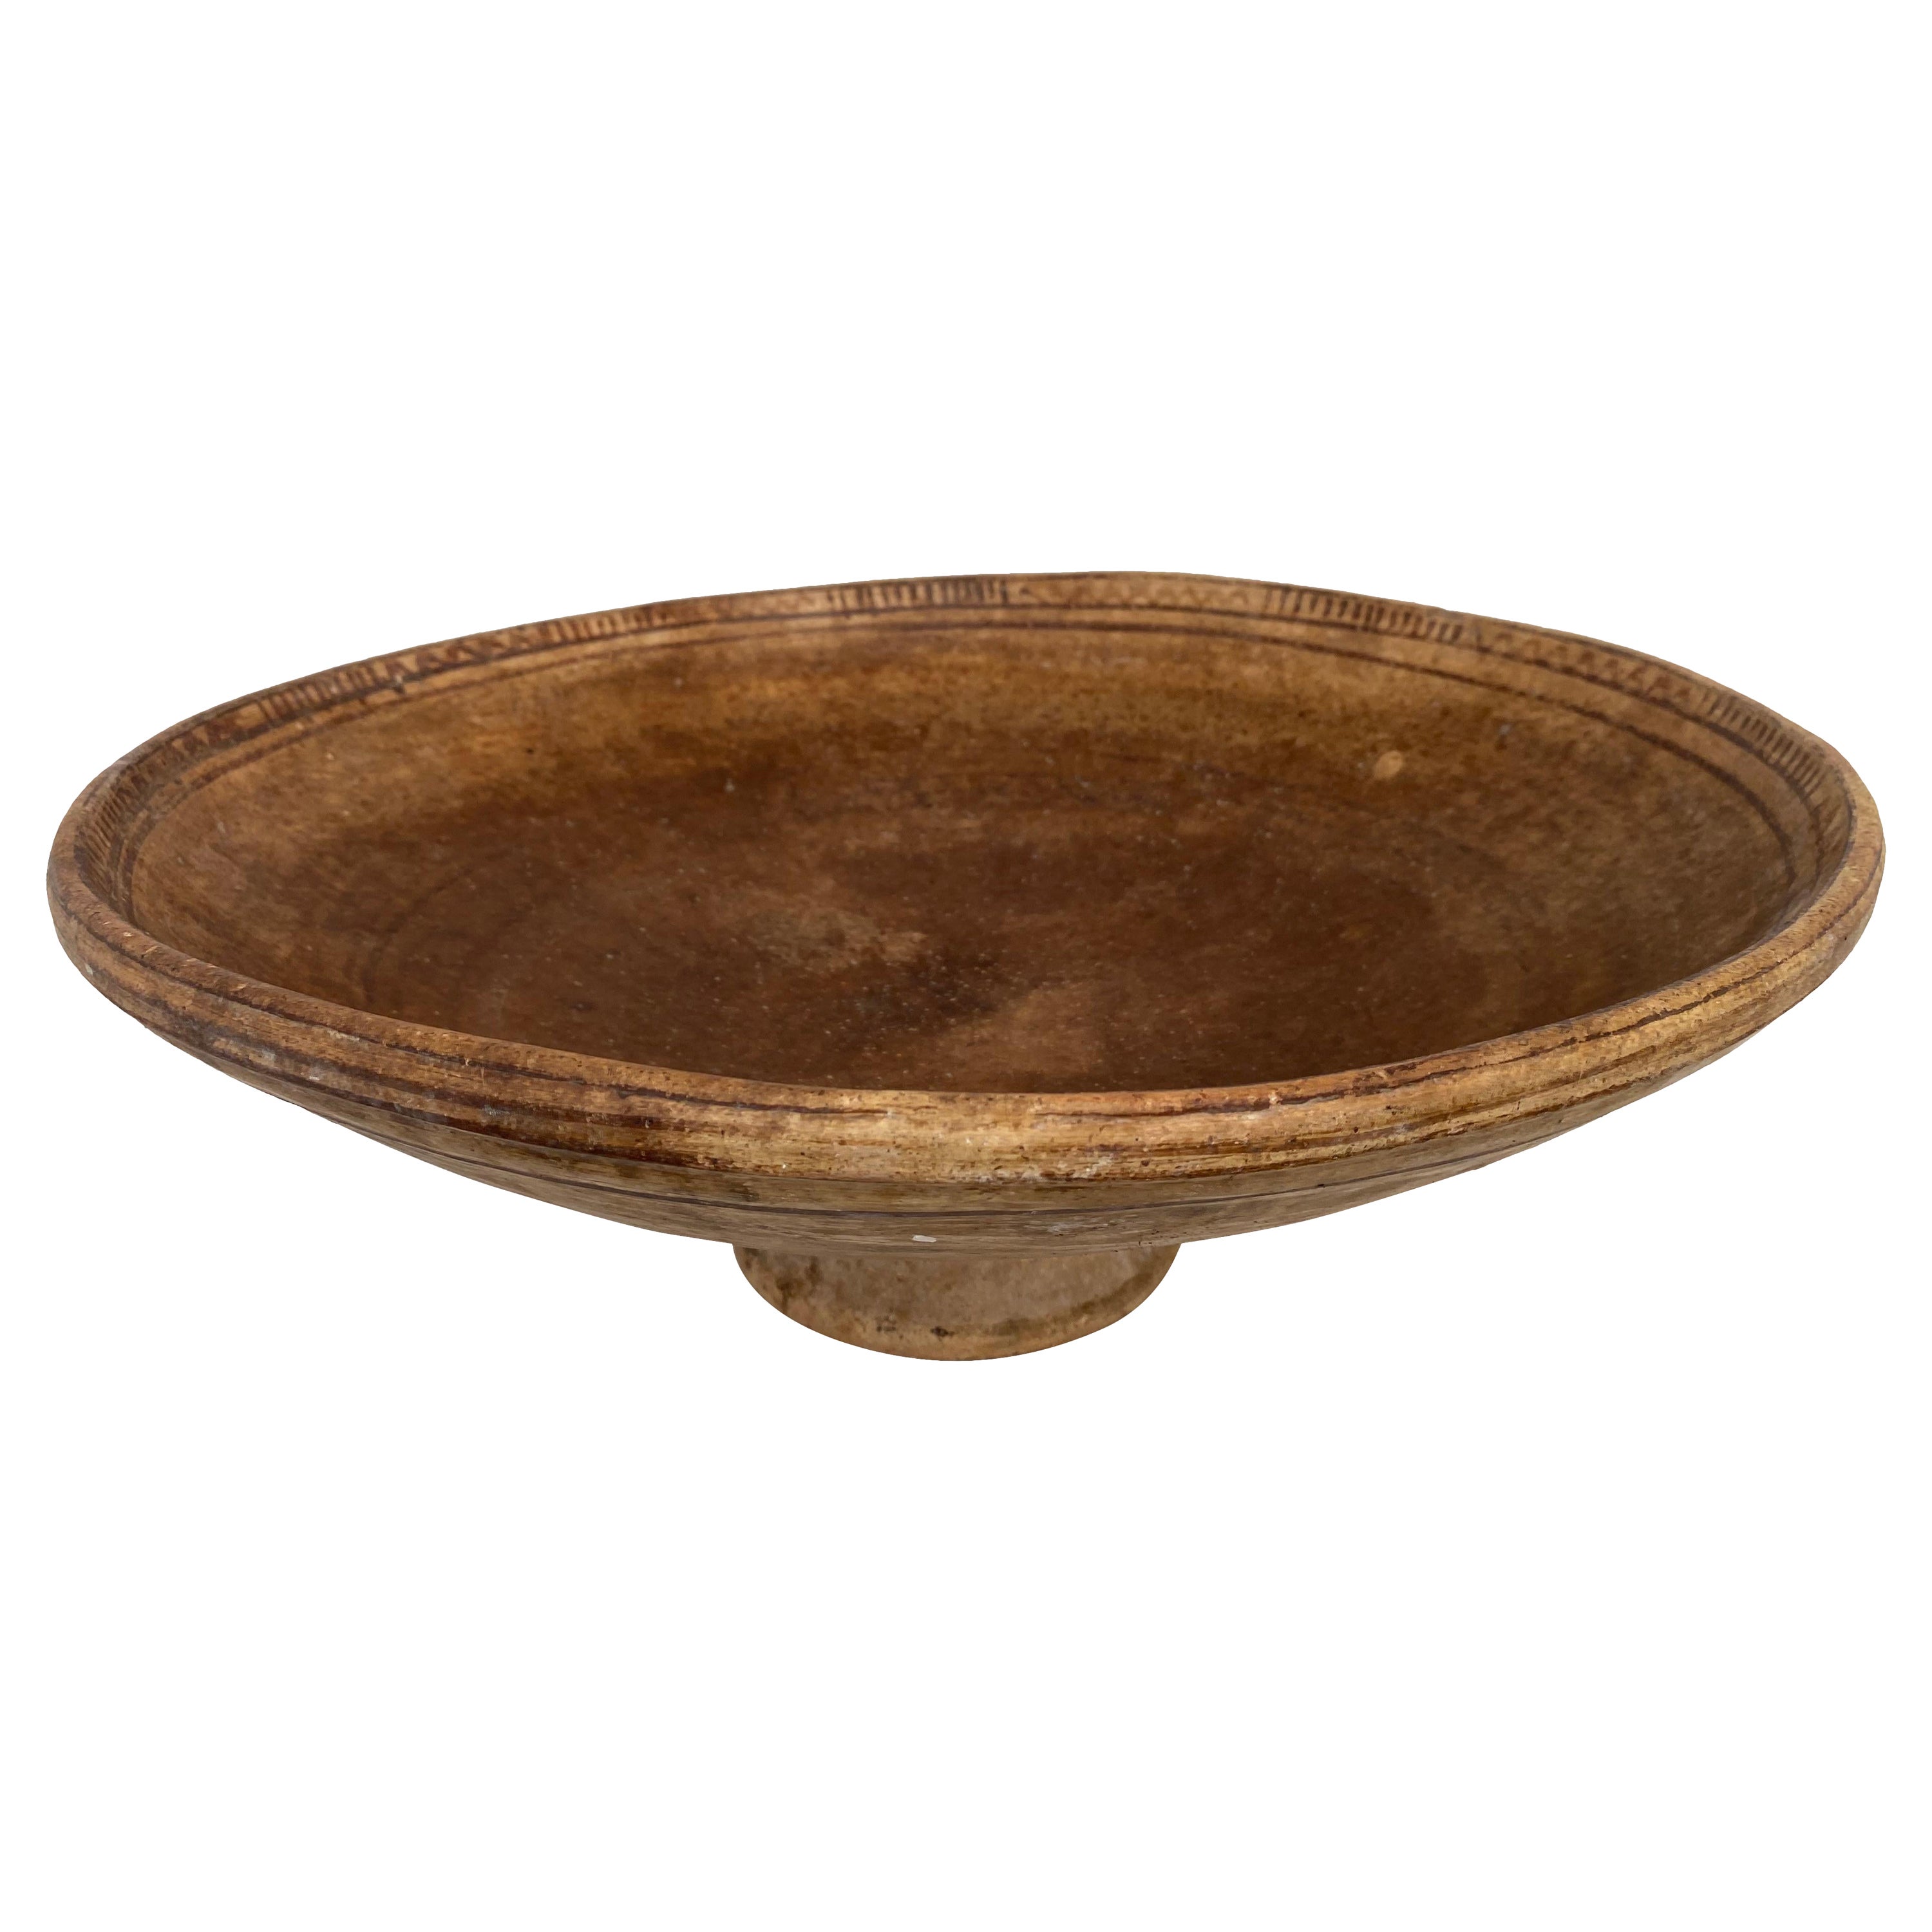 Antique, Terracotta Berber Bowl on a central foot